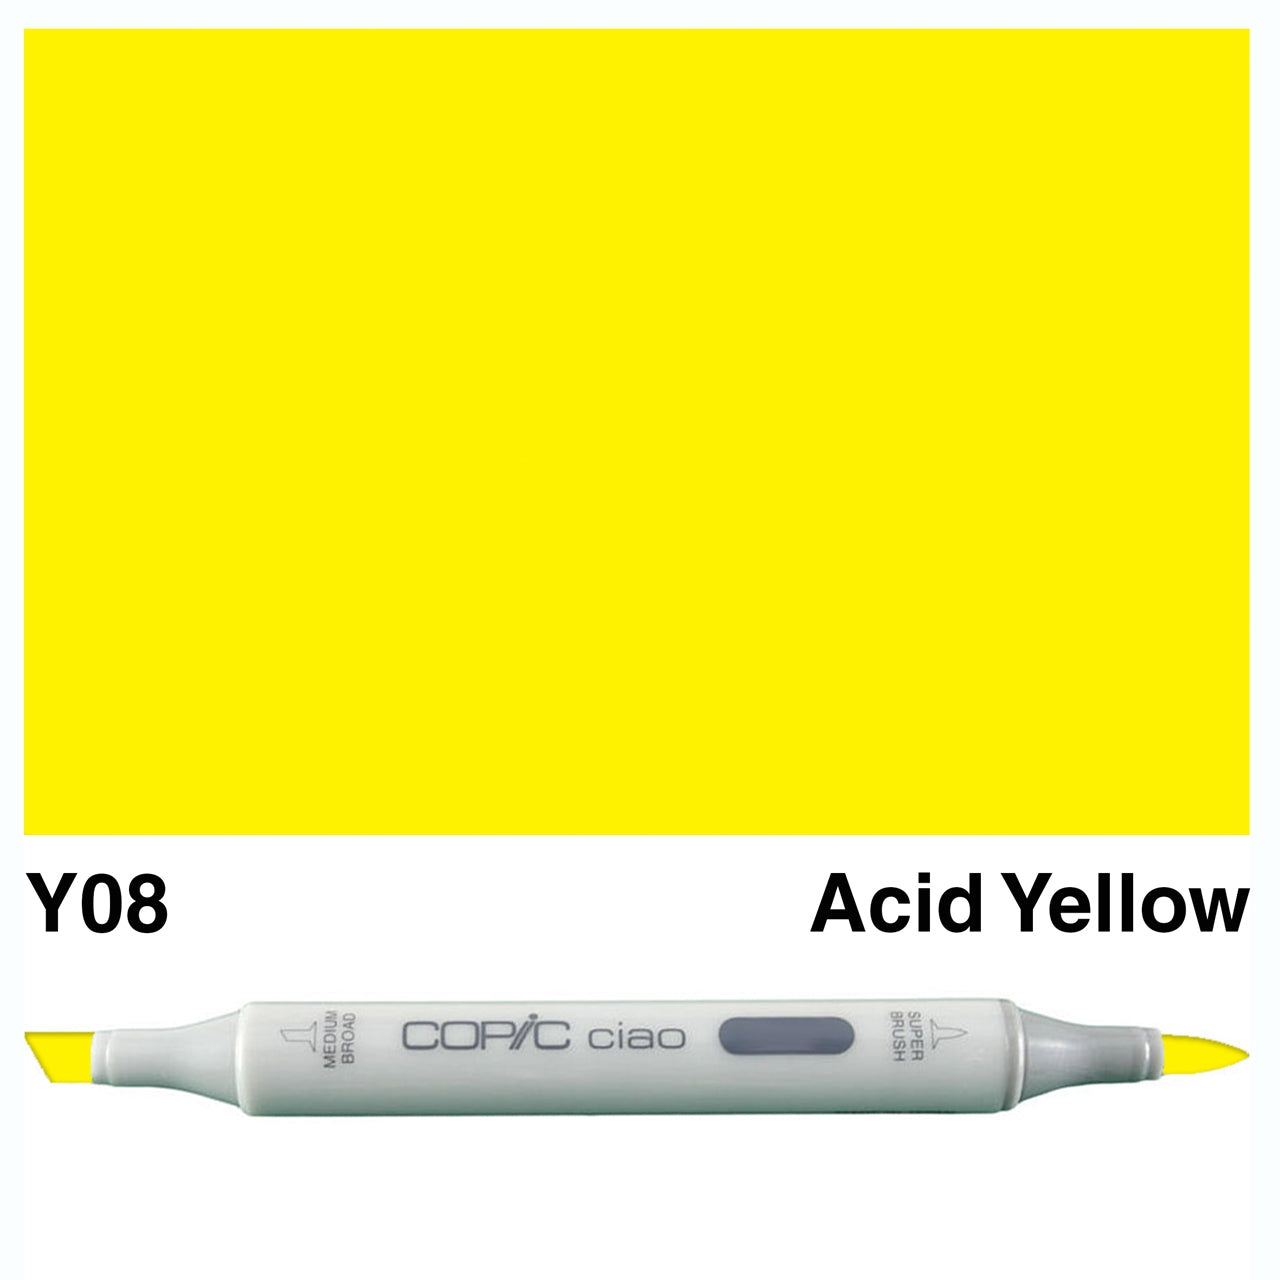 Copic Ciao Marker Y08 - Acid Yellow